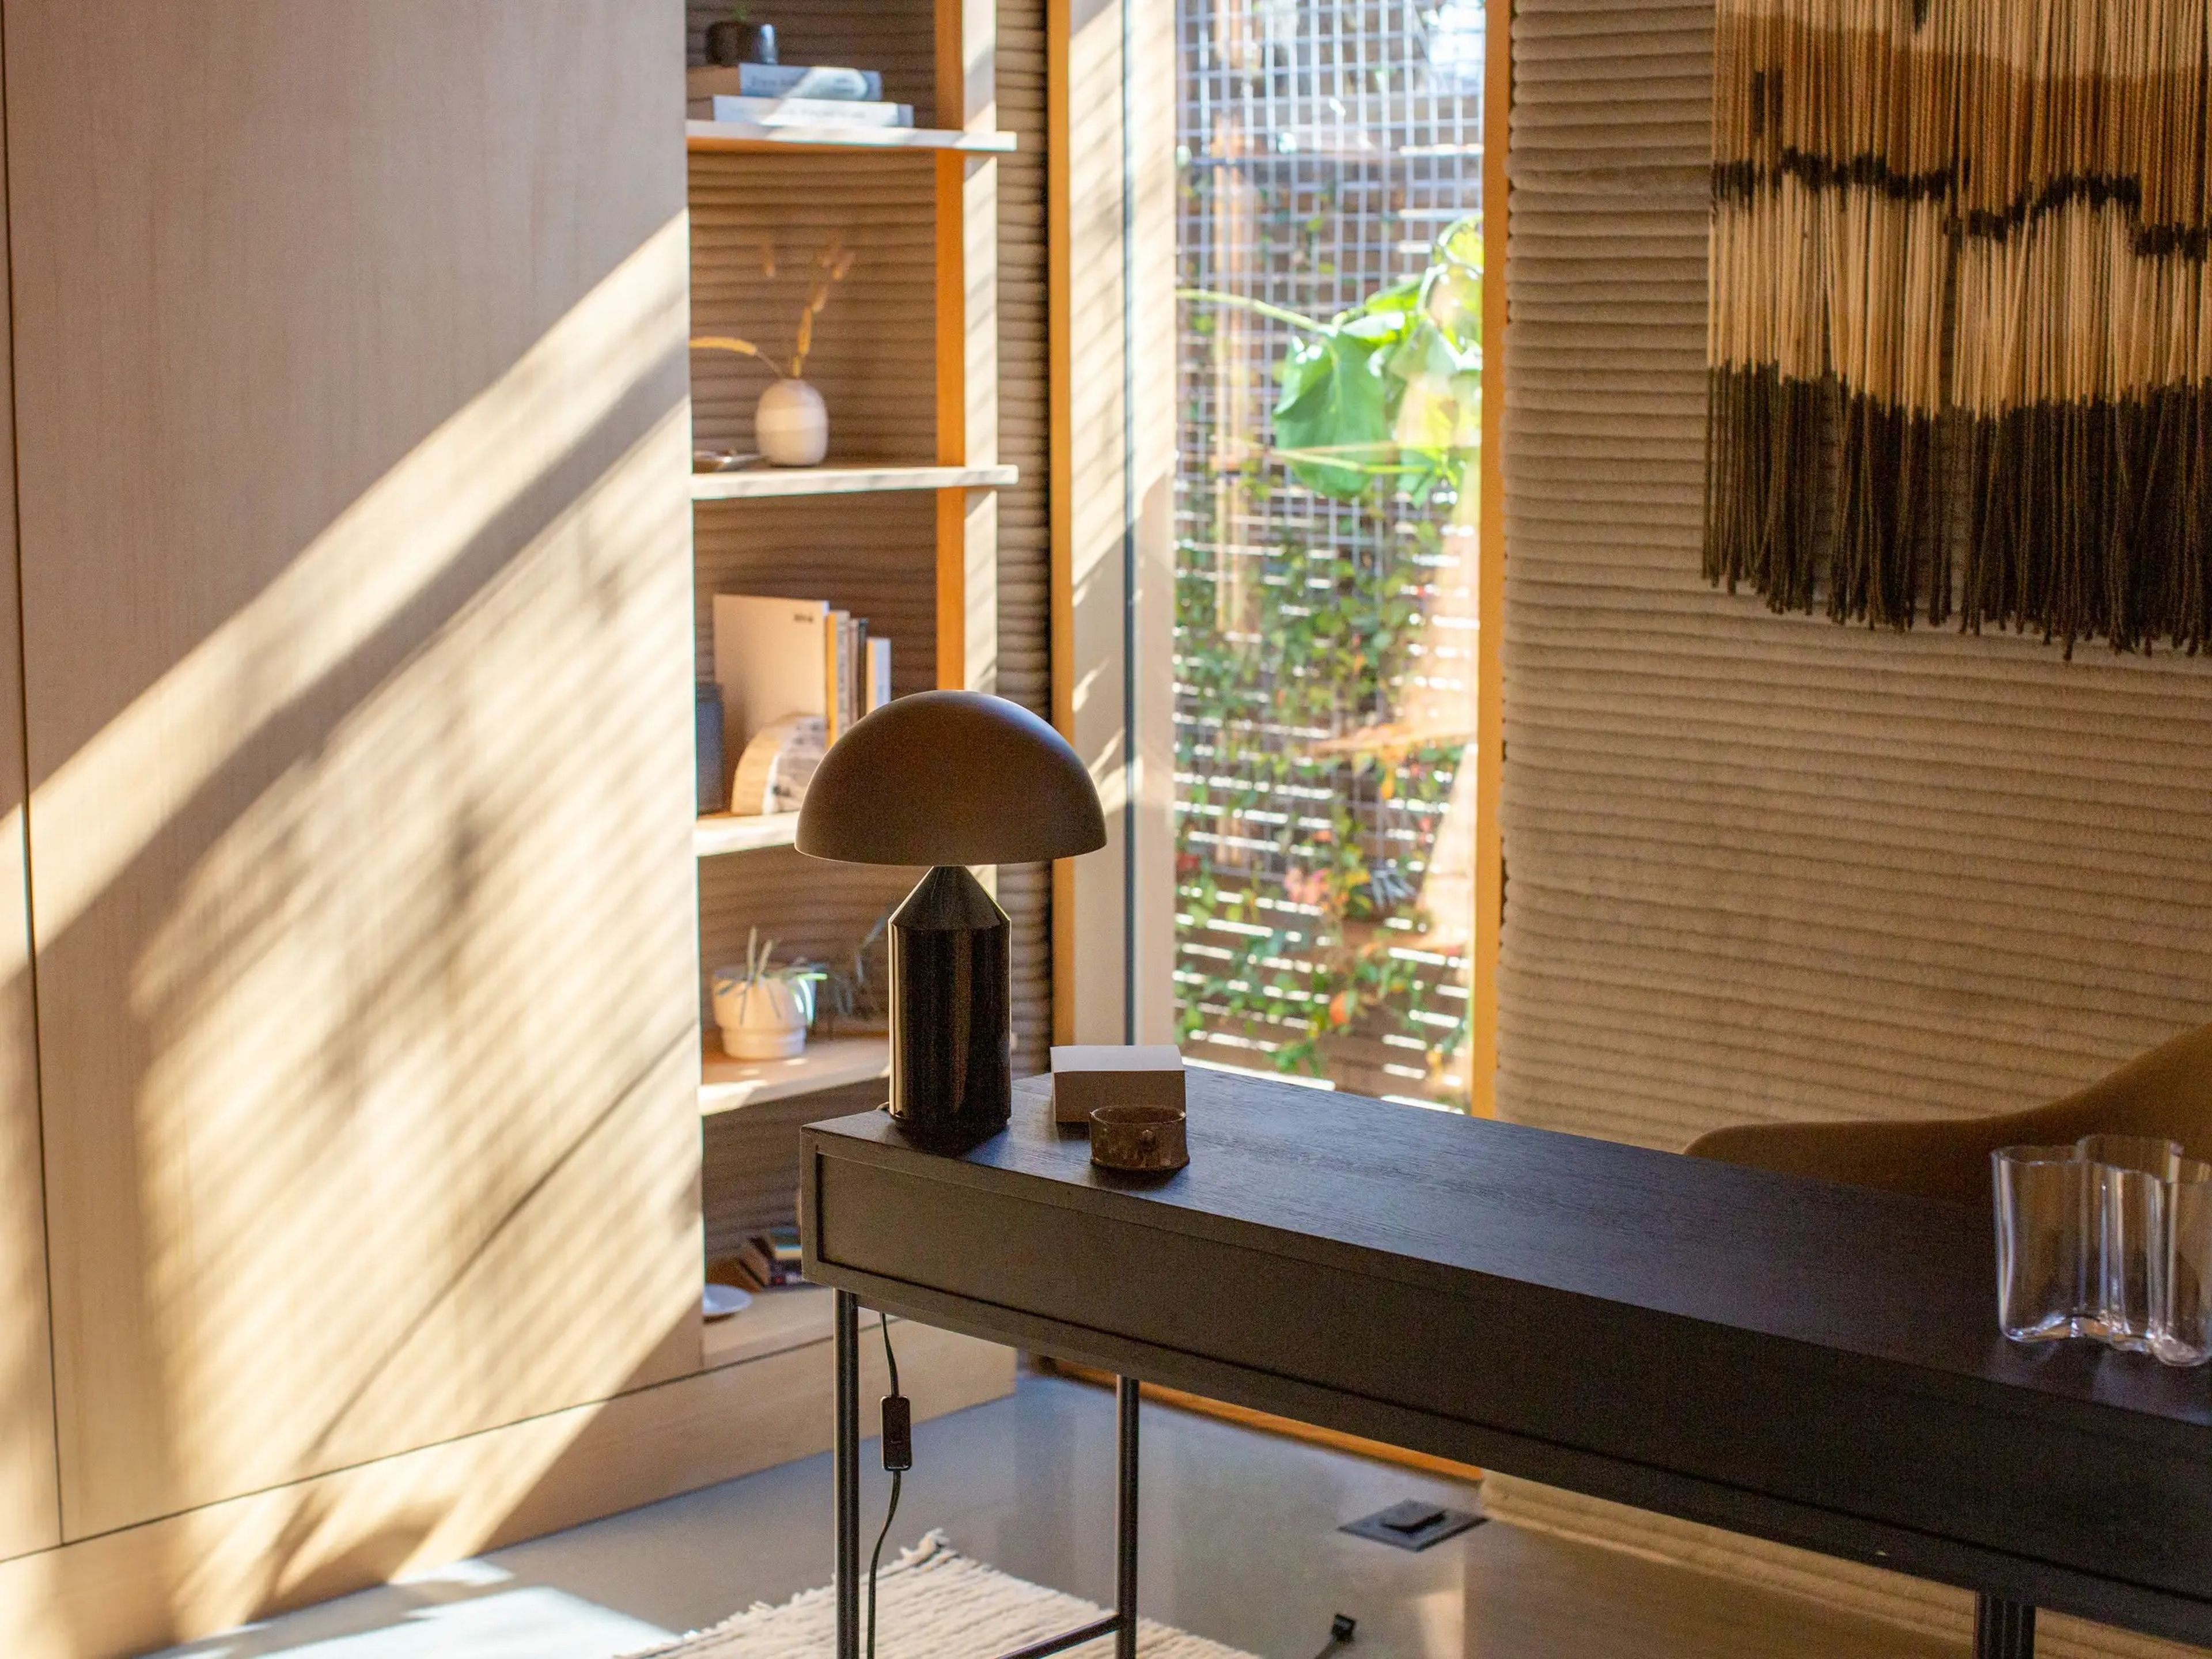 Light and shadows shining on a shelving storage in the home office.